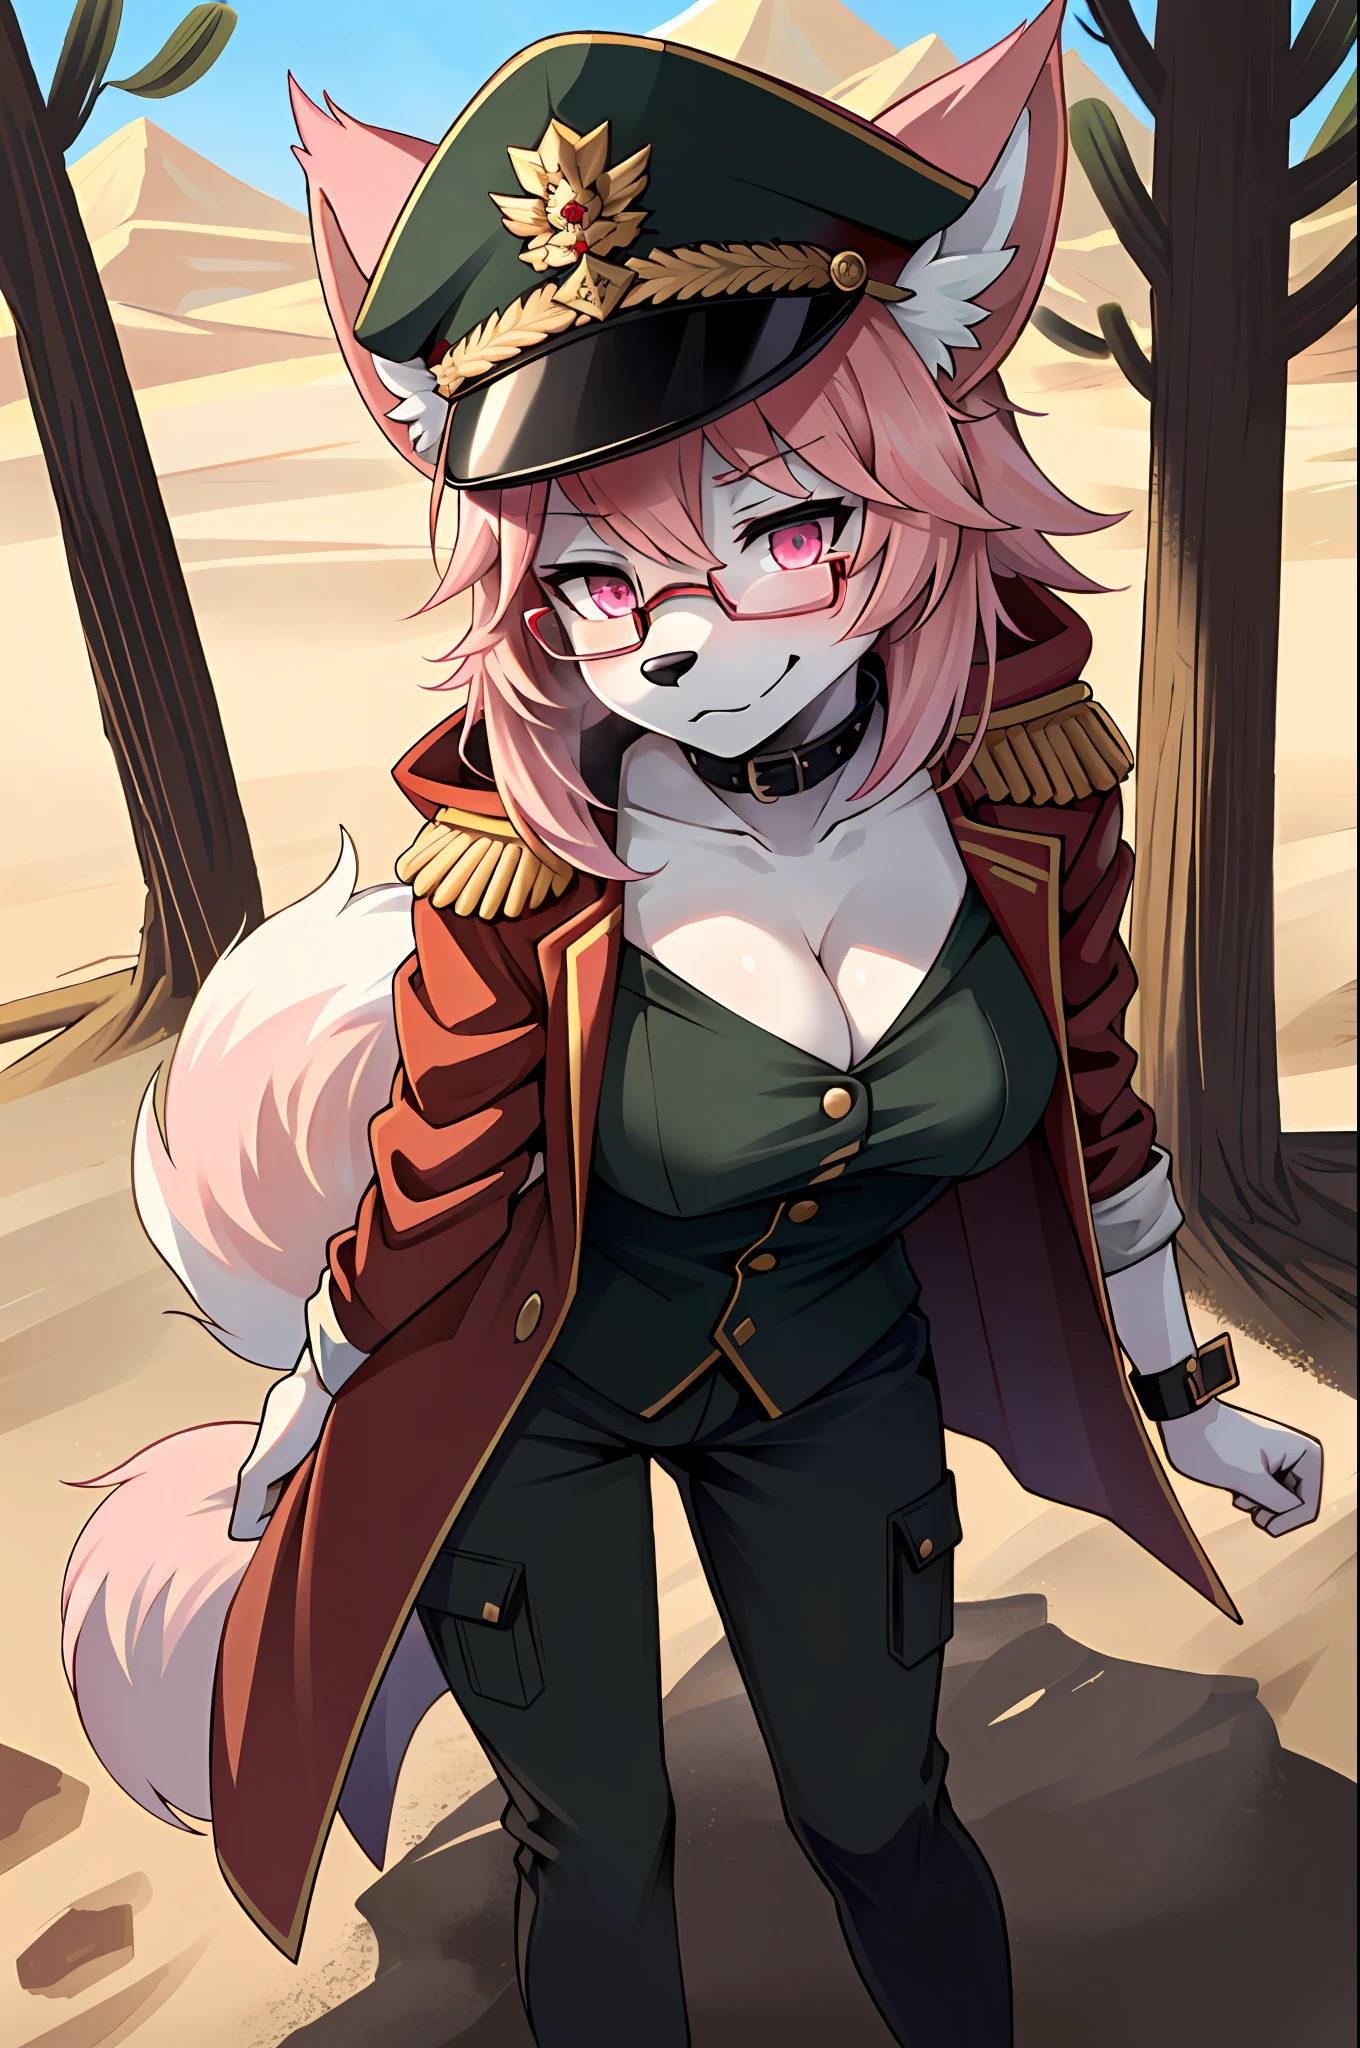 (masterpiece, best quality)), (Anthro Furry:1.3, muzzle:1.2, Anthro:1.3, furry:1.2, closeup:1.2, female solo:1.2, (wearing Russian military coat), standing, sexy body position, military pants, wearing glasses, Fox spiraled in the colors of Funtime Foxy,five nights at freddy,white skin pink details, pink eyes, pink hair, , sexy position, desert environment place, Russian general military hat,  Spiral art style in furry Vixens